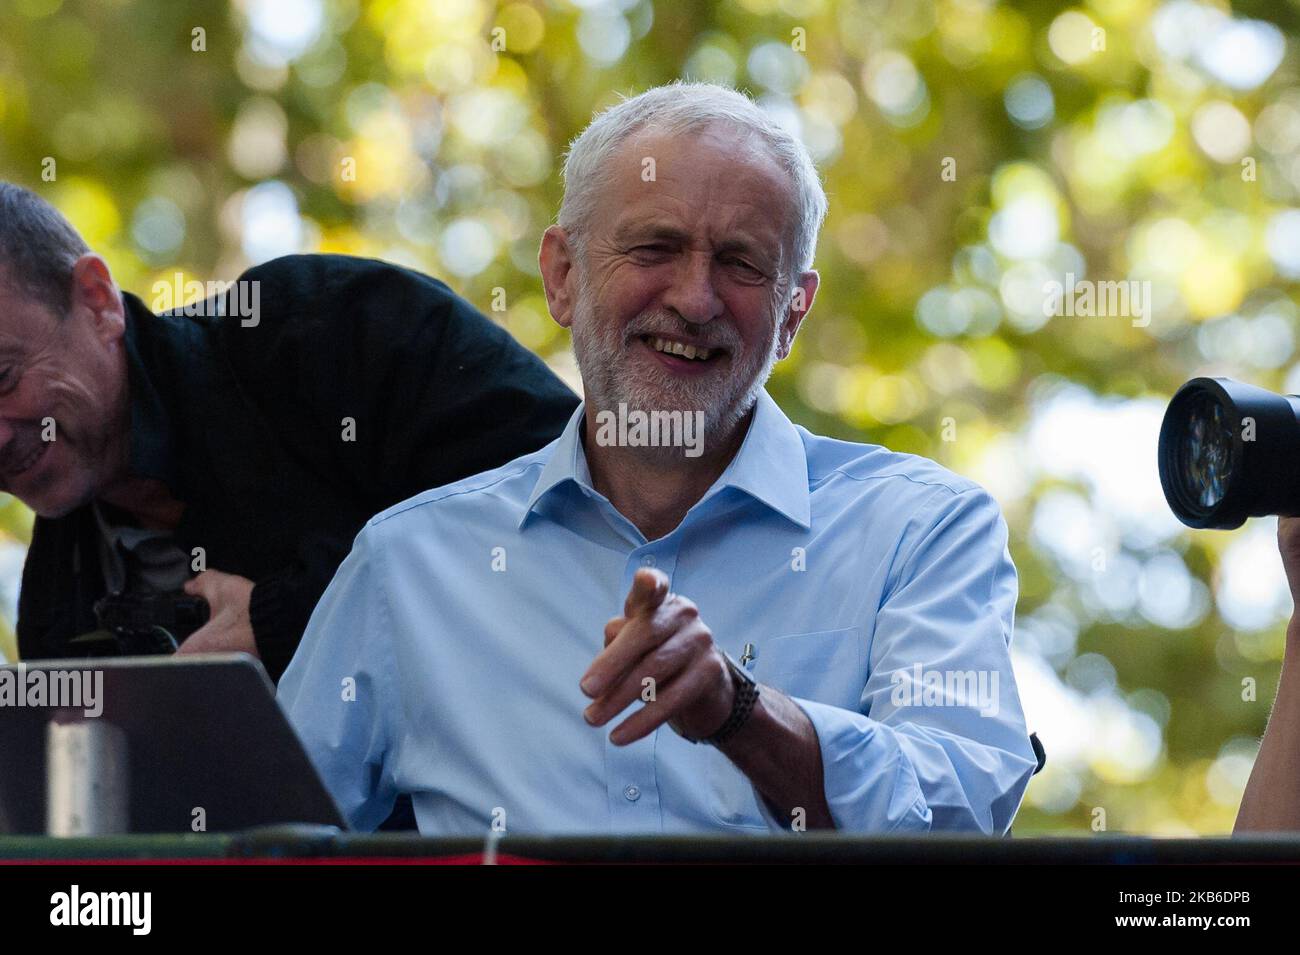 Labour Party Leader Jeremy Corbyn addresses thousands of demonstrators gathered along Millbank during Global Climate Strike on 20 September, 2019 in London, England, to draw international attention to the climate emergency and ecological crisis. Millions of people are expected to take to the streets in over 4,000 locations in more than 130 countries across the world during a week-long mobilisation. (Photo by WIktor Szymanowicz/NurPhoto) Stock Photo